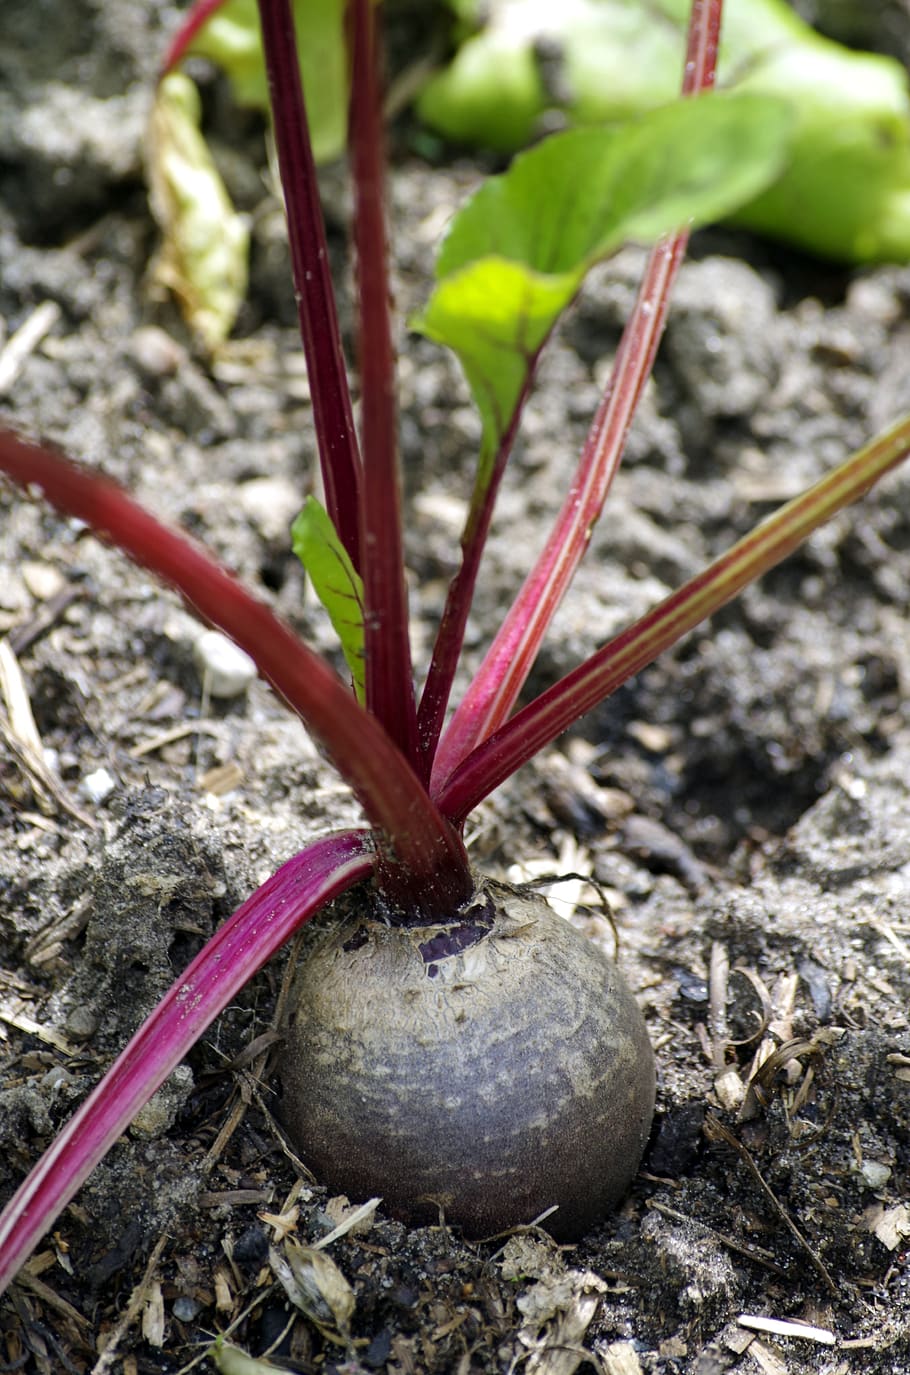 Photograph of a beetroot half-out of the ground.